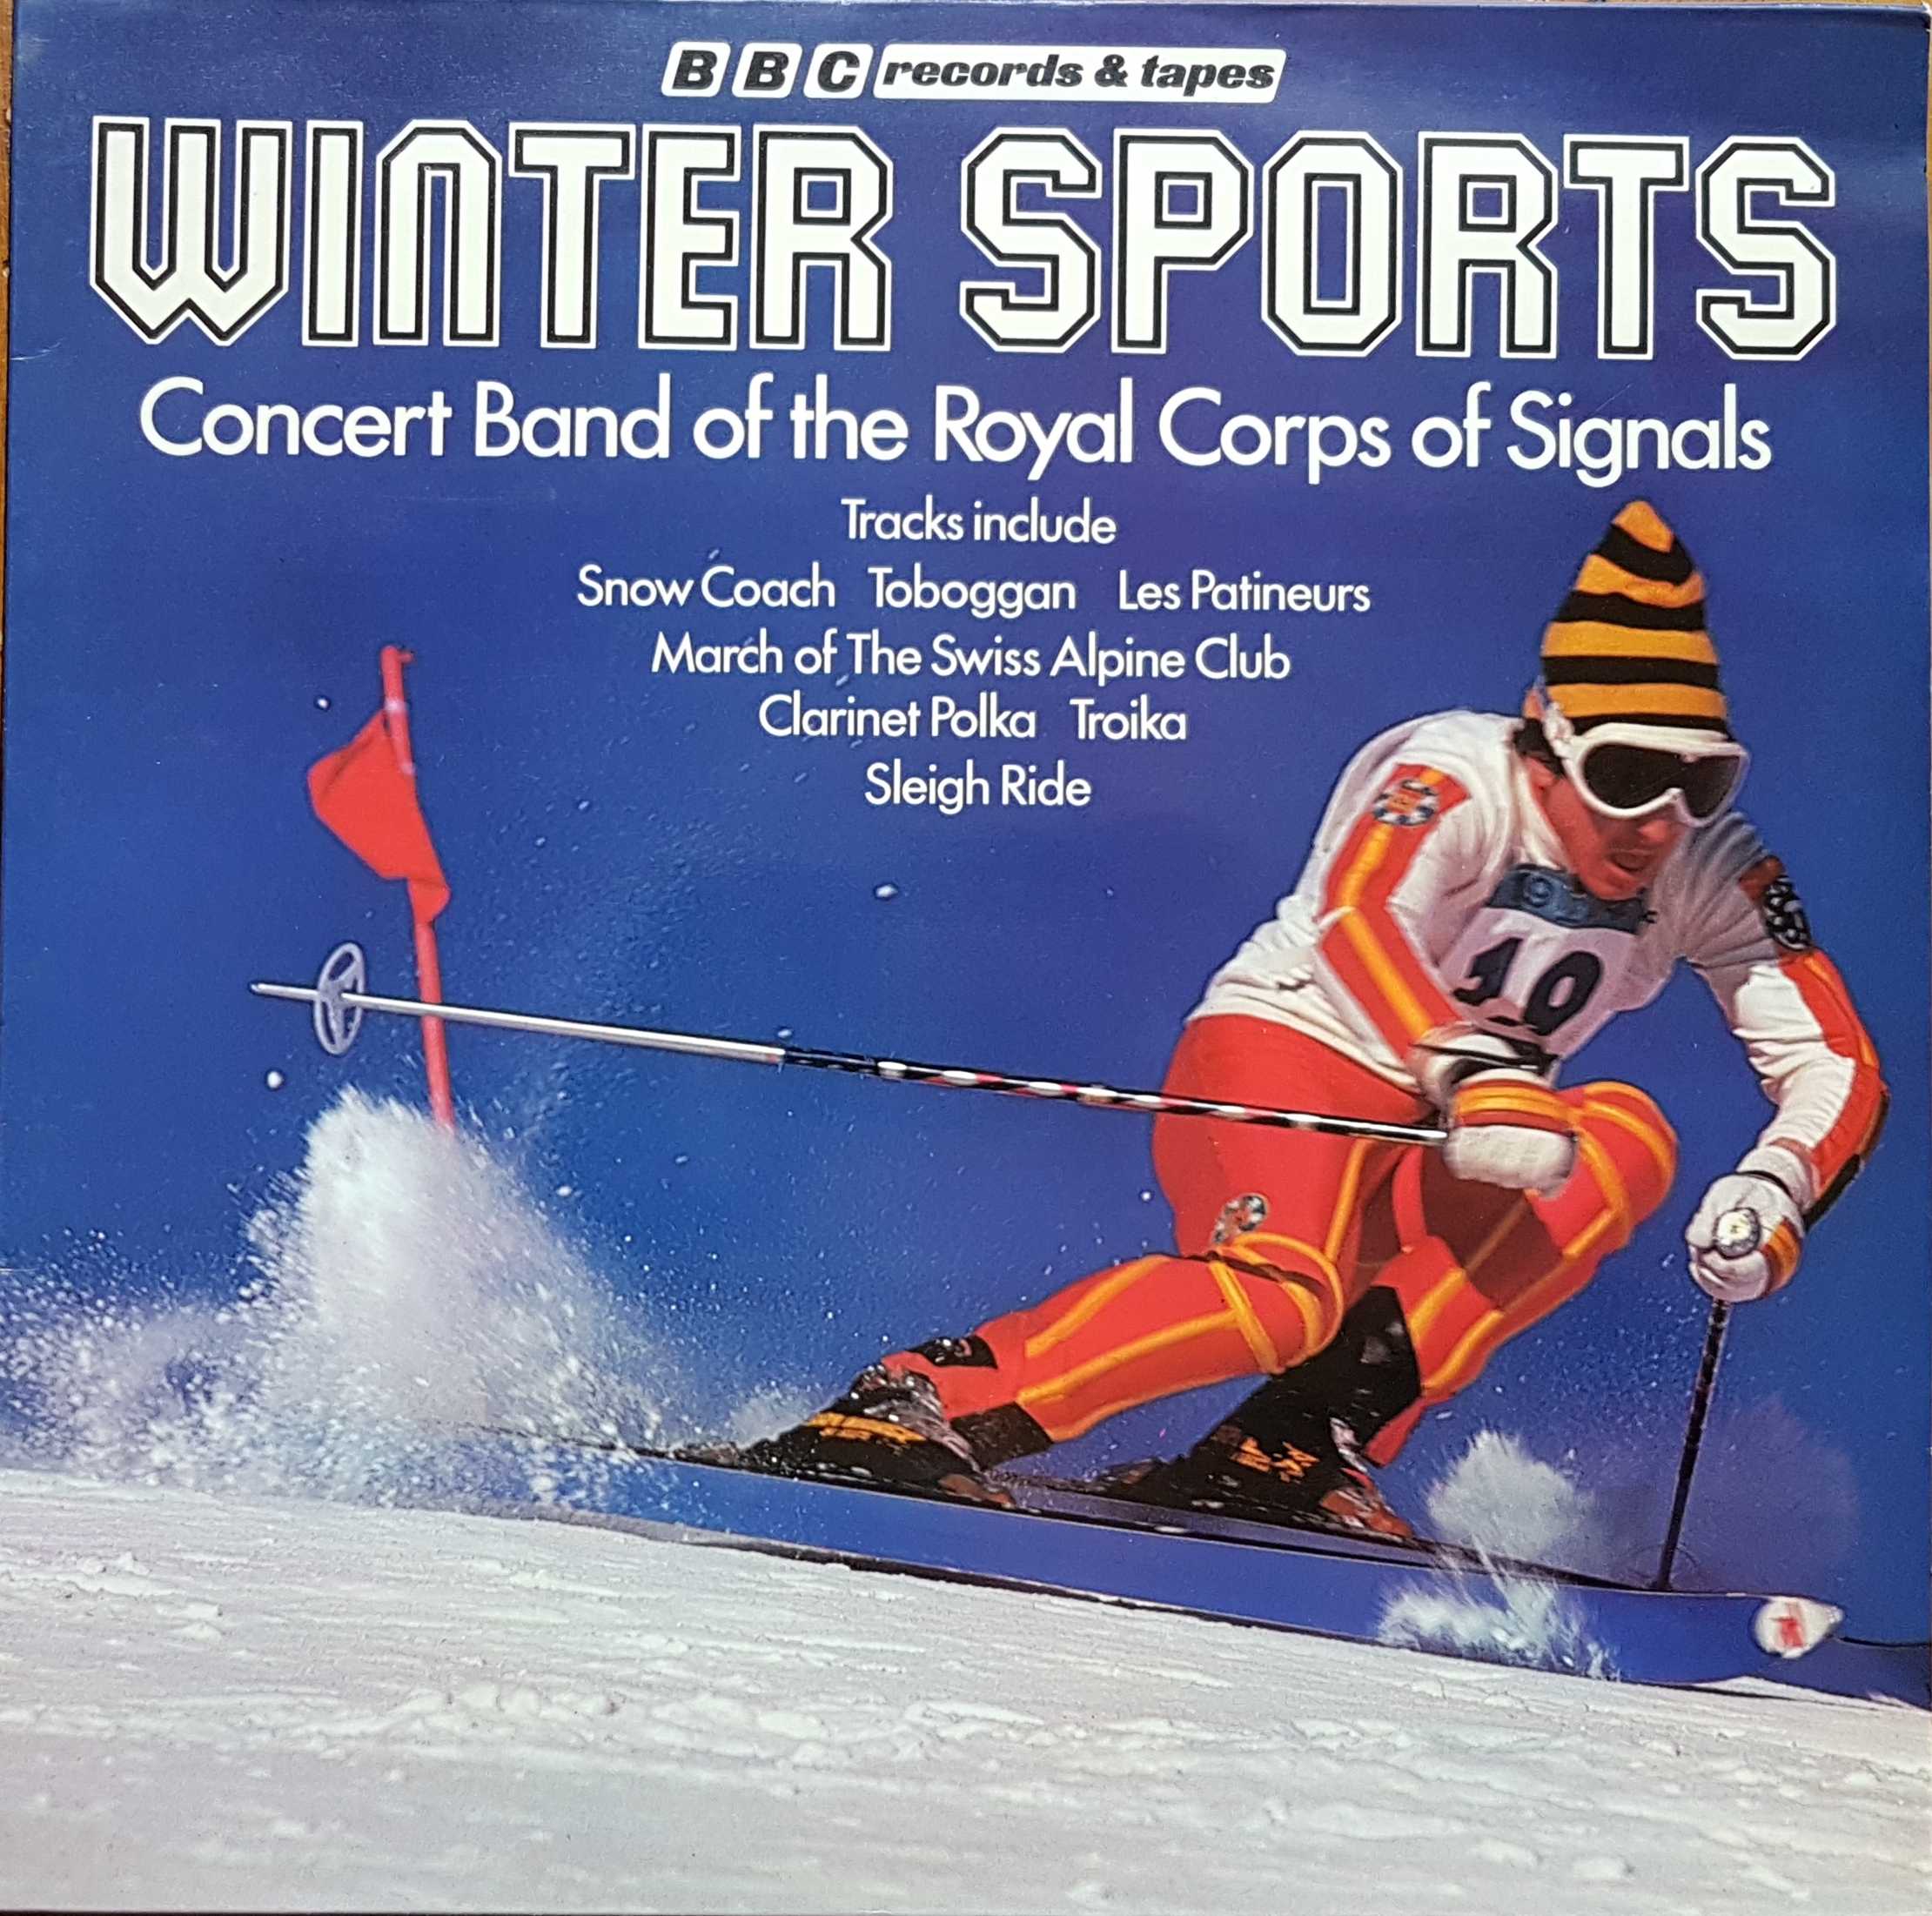 Picture of REC 268 Winter sports - Music of the snow resorts by artist Various from the BBC albums - Records and Tapes library